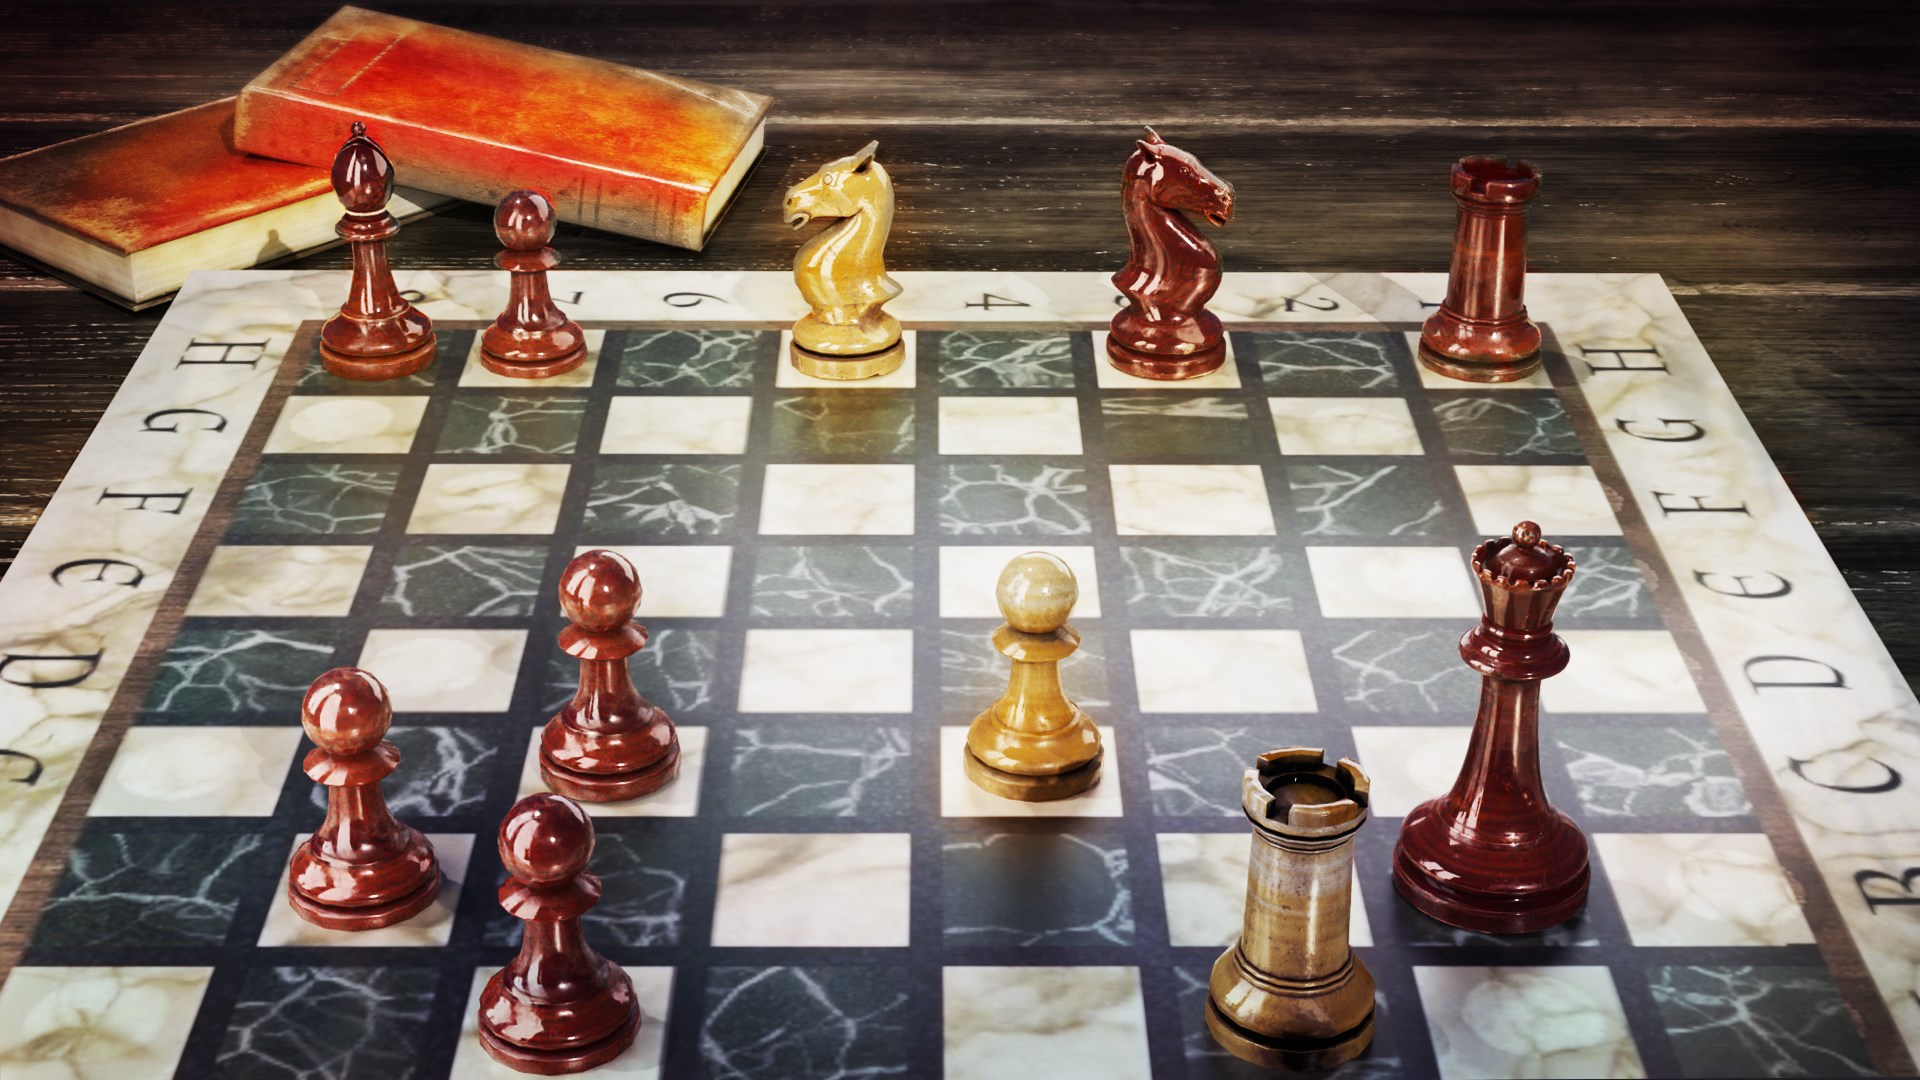 Slijm piano boter Chess 3D: Real Strategy Board Game kopen - Microsoft Store nl-NL